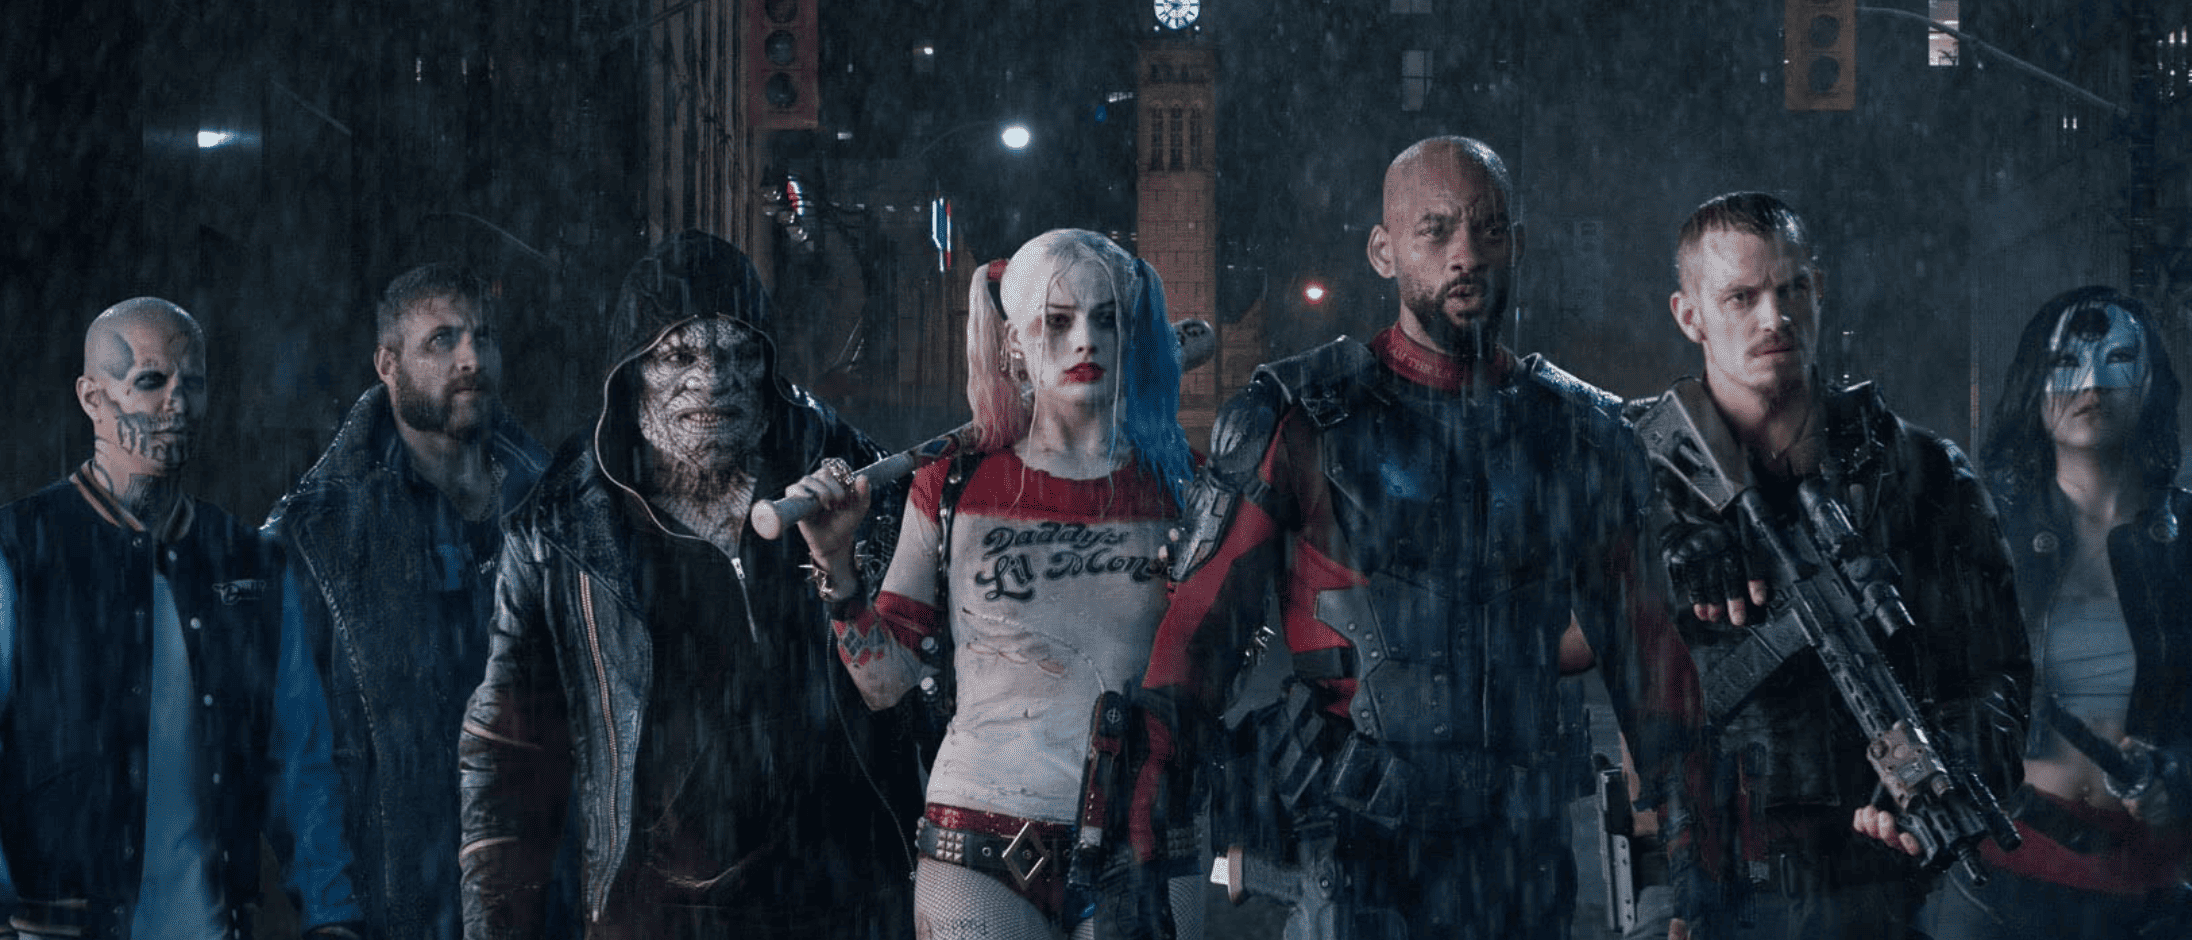 The Suicide Squad stands in the rain, ready for battle in this image from DC Studios.